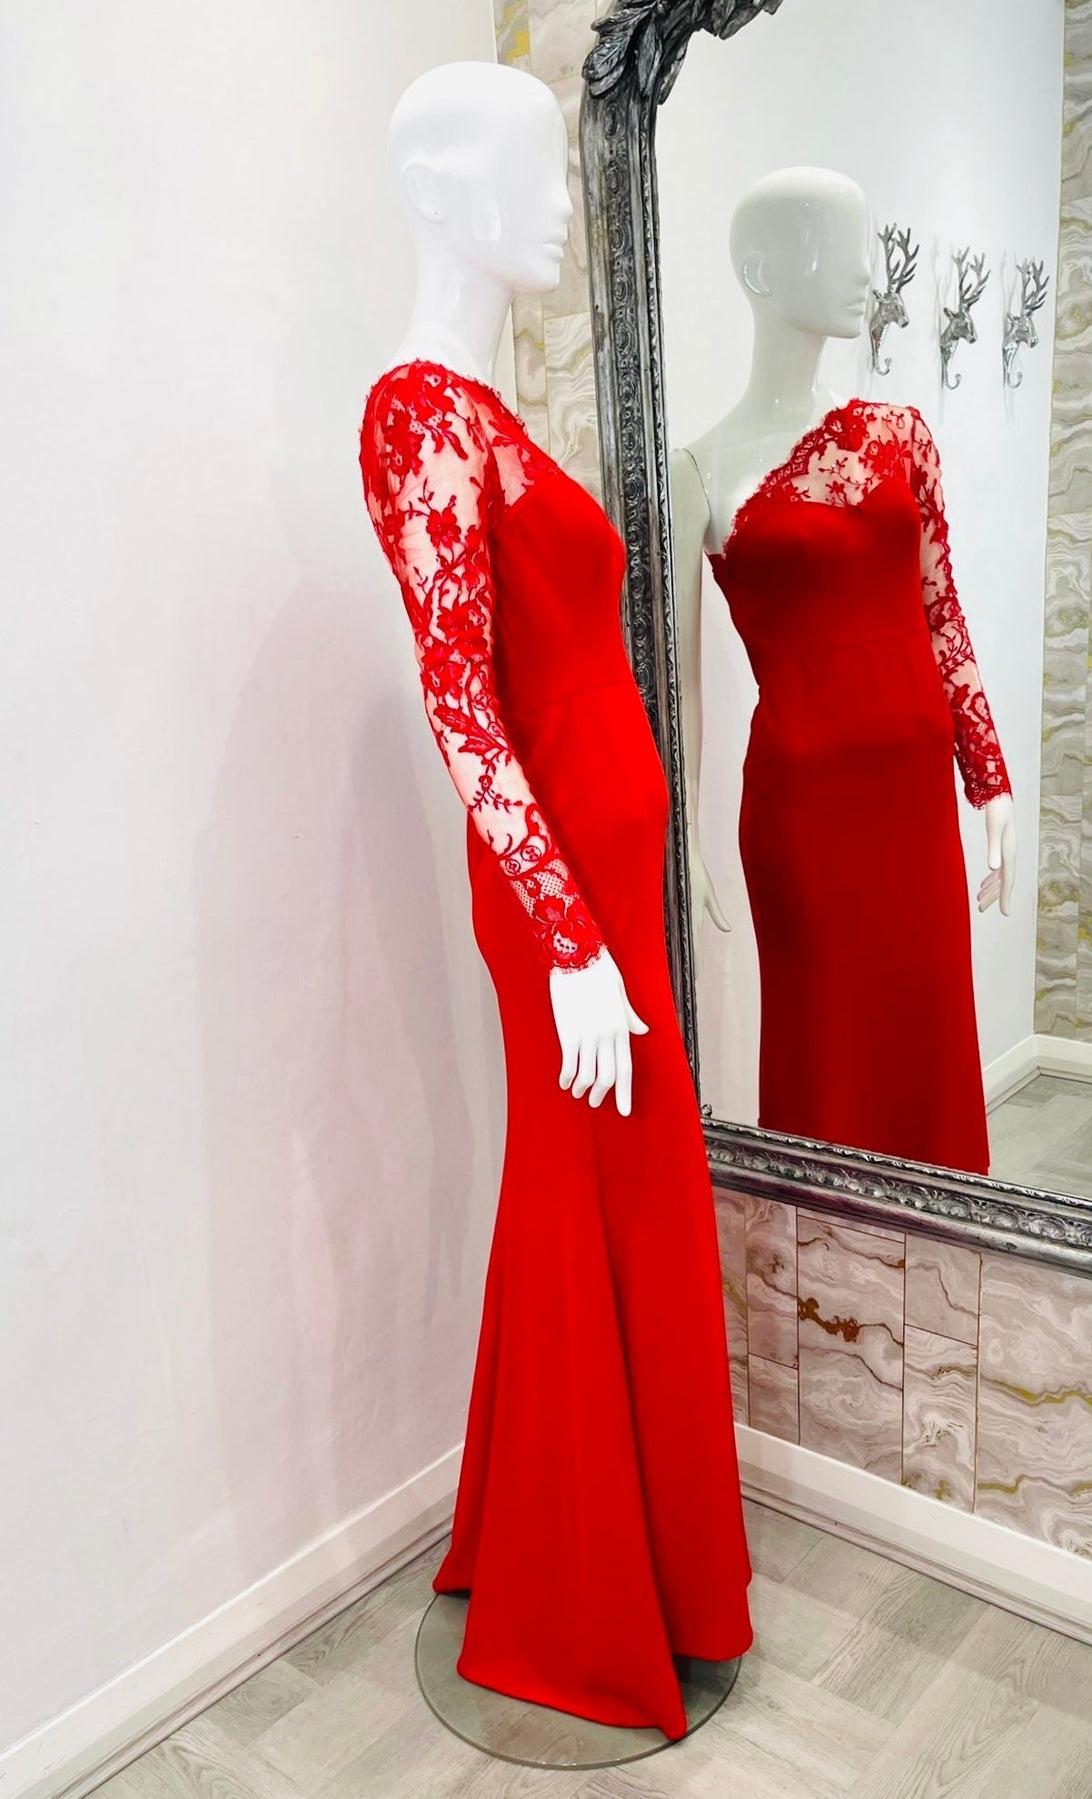 Alexander McQueen Lace One Shoulder Gown In Excellent Condition For Sale In London, GB